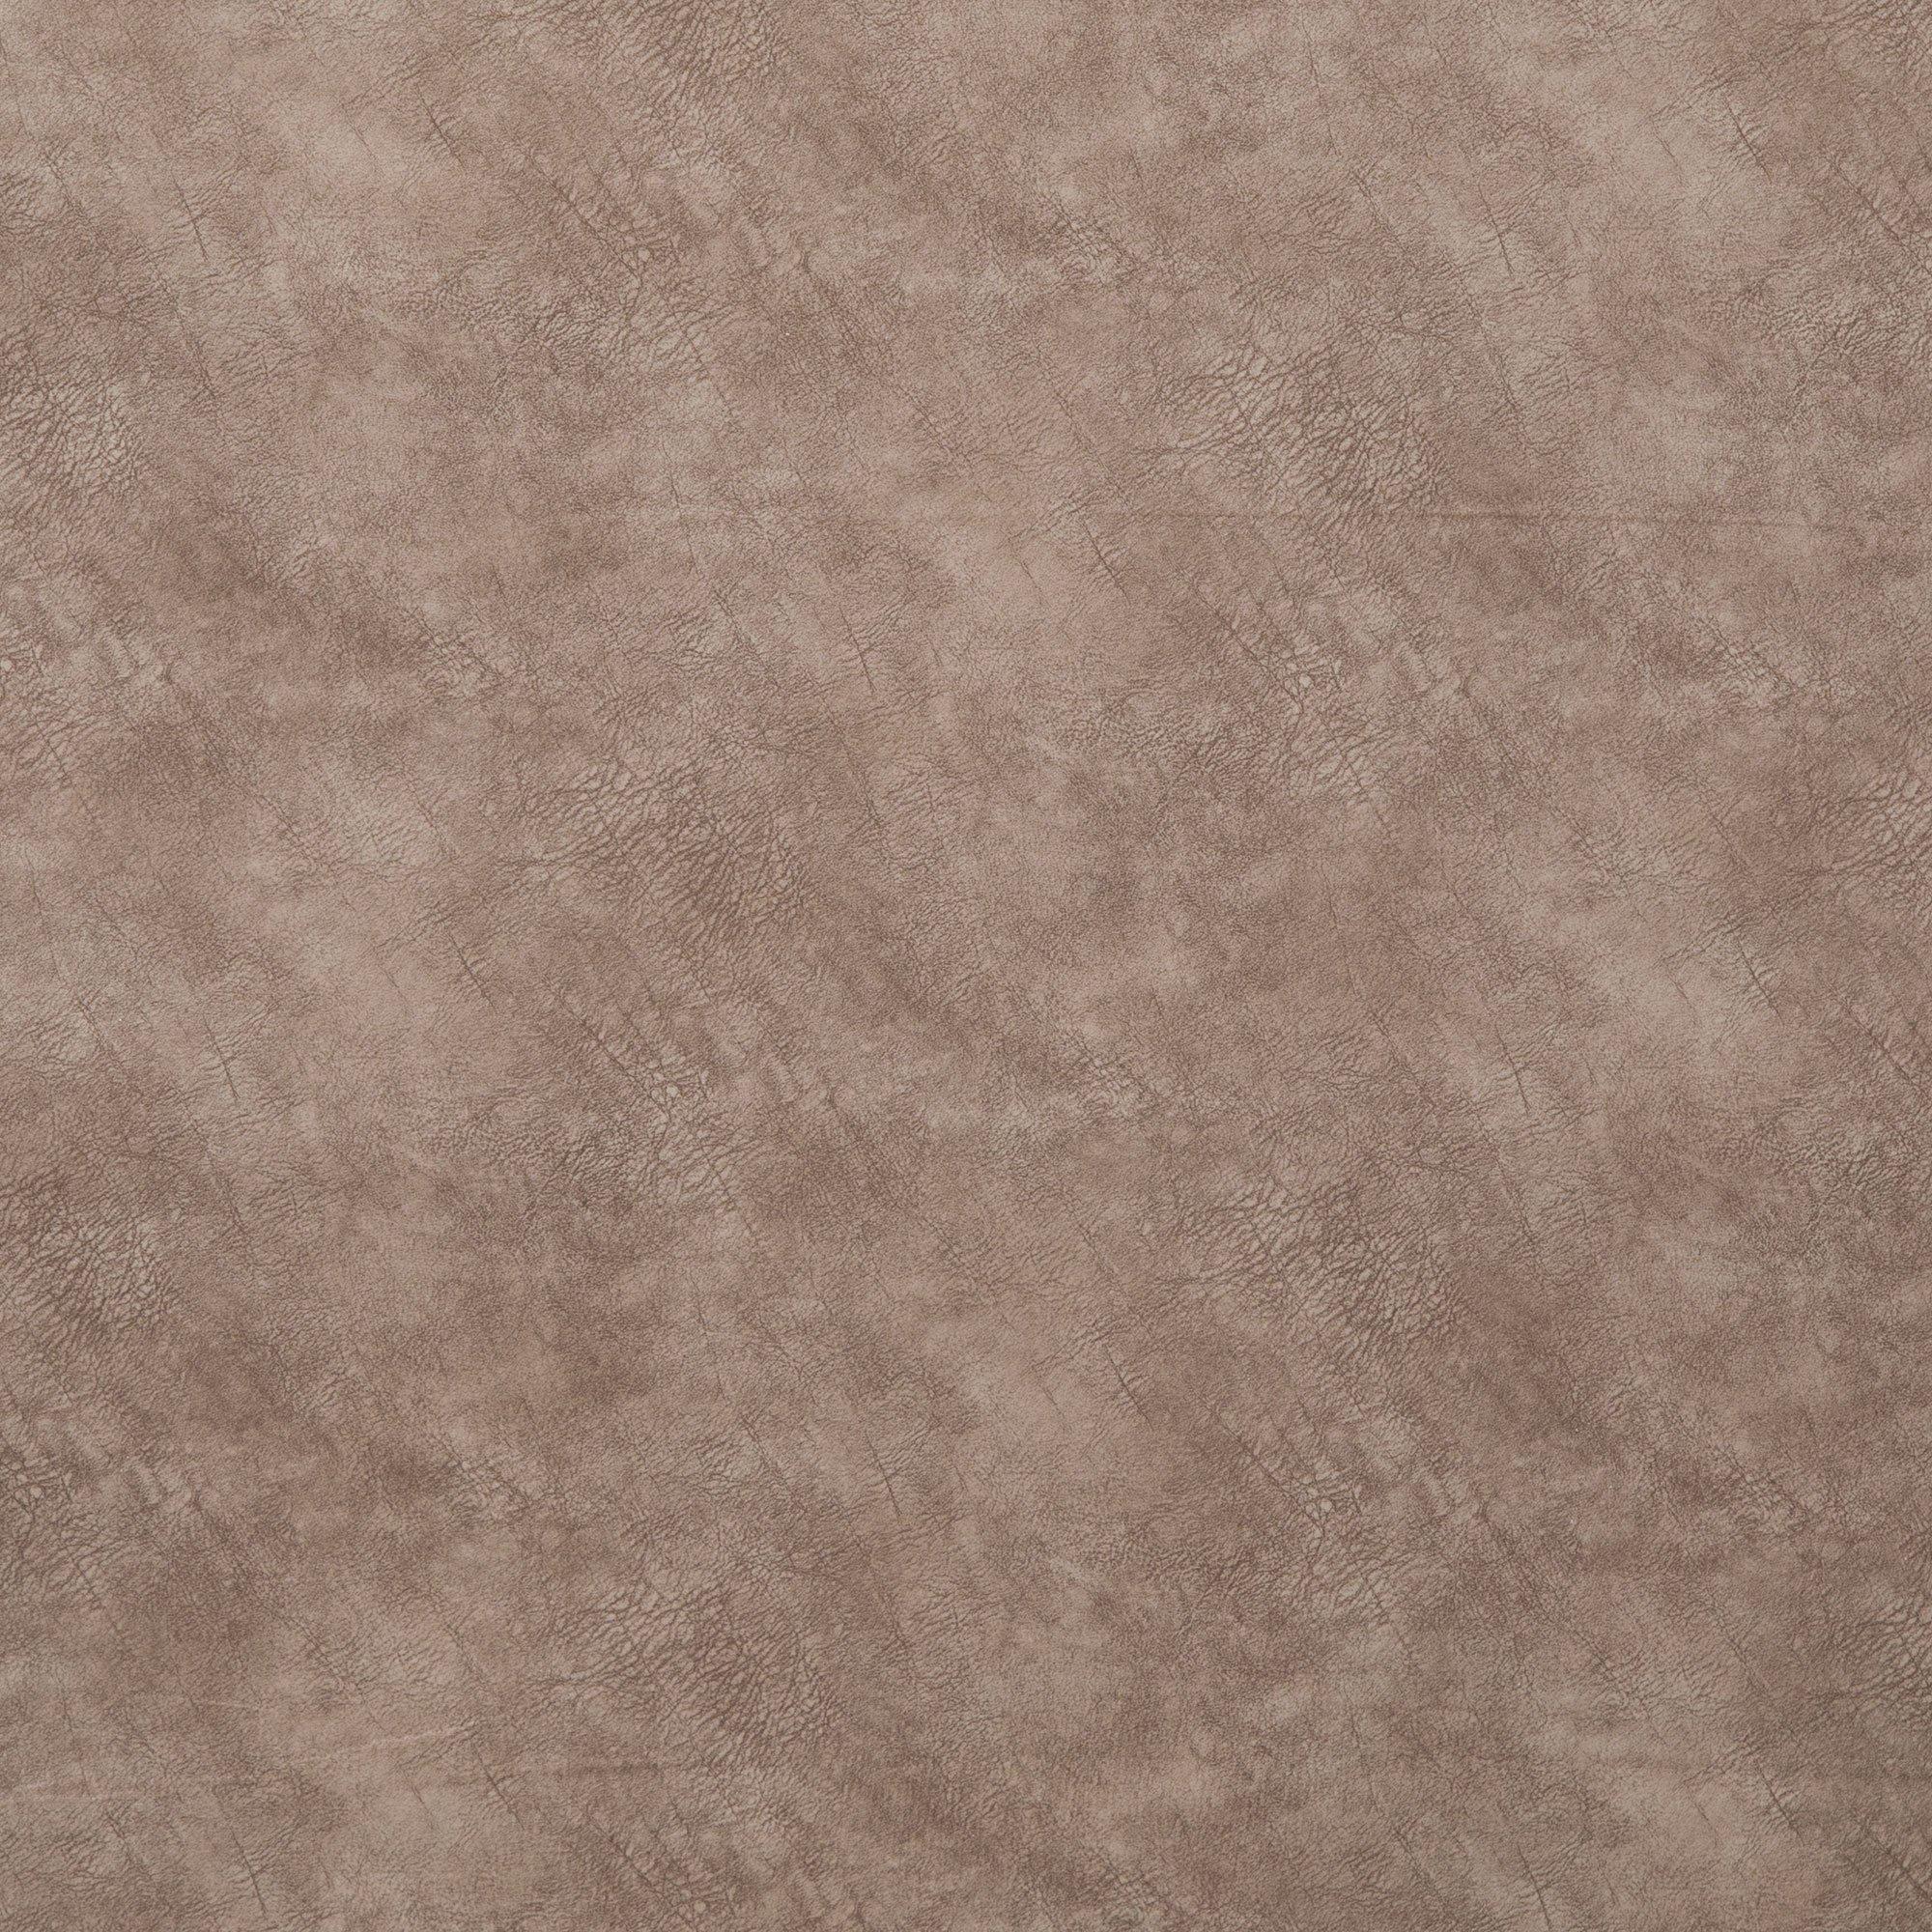 Suede Faux Leather Sheets, Synthetic Leather Sheet